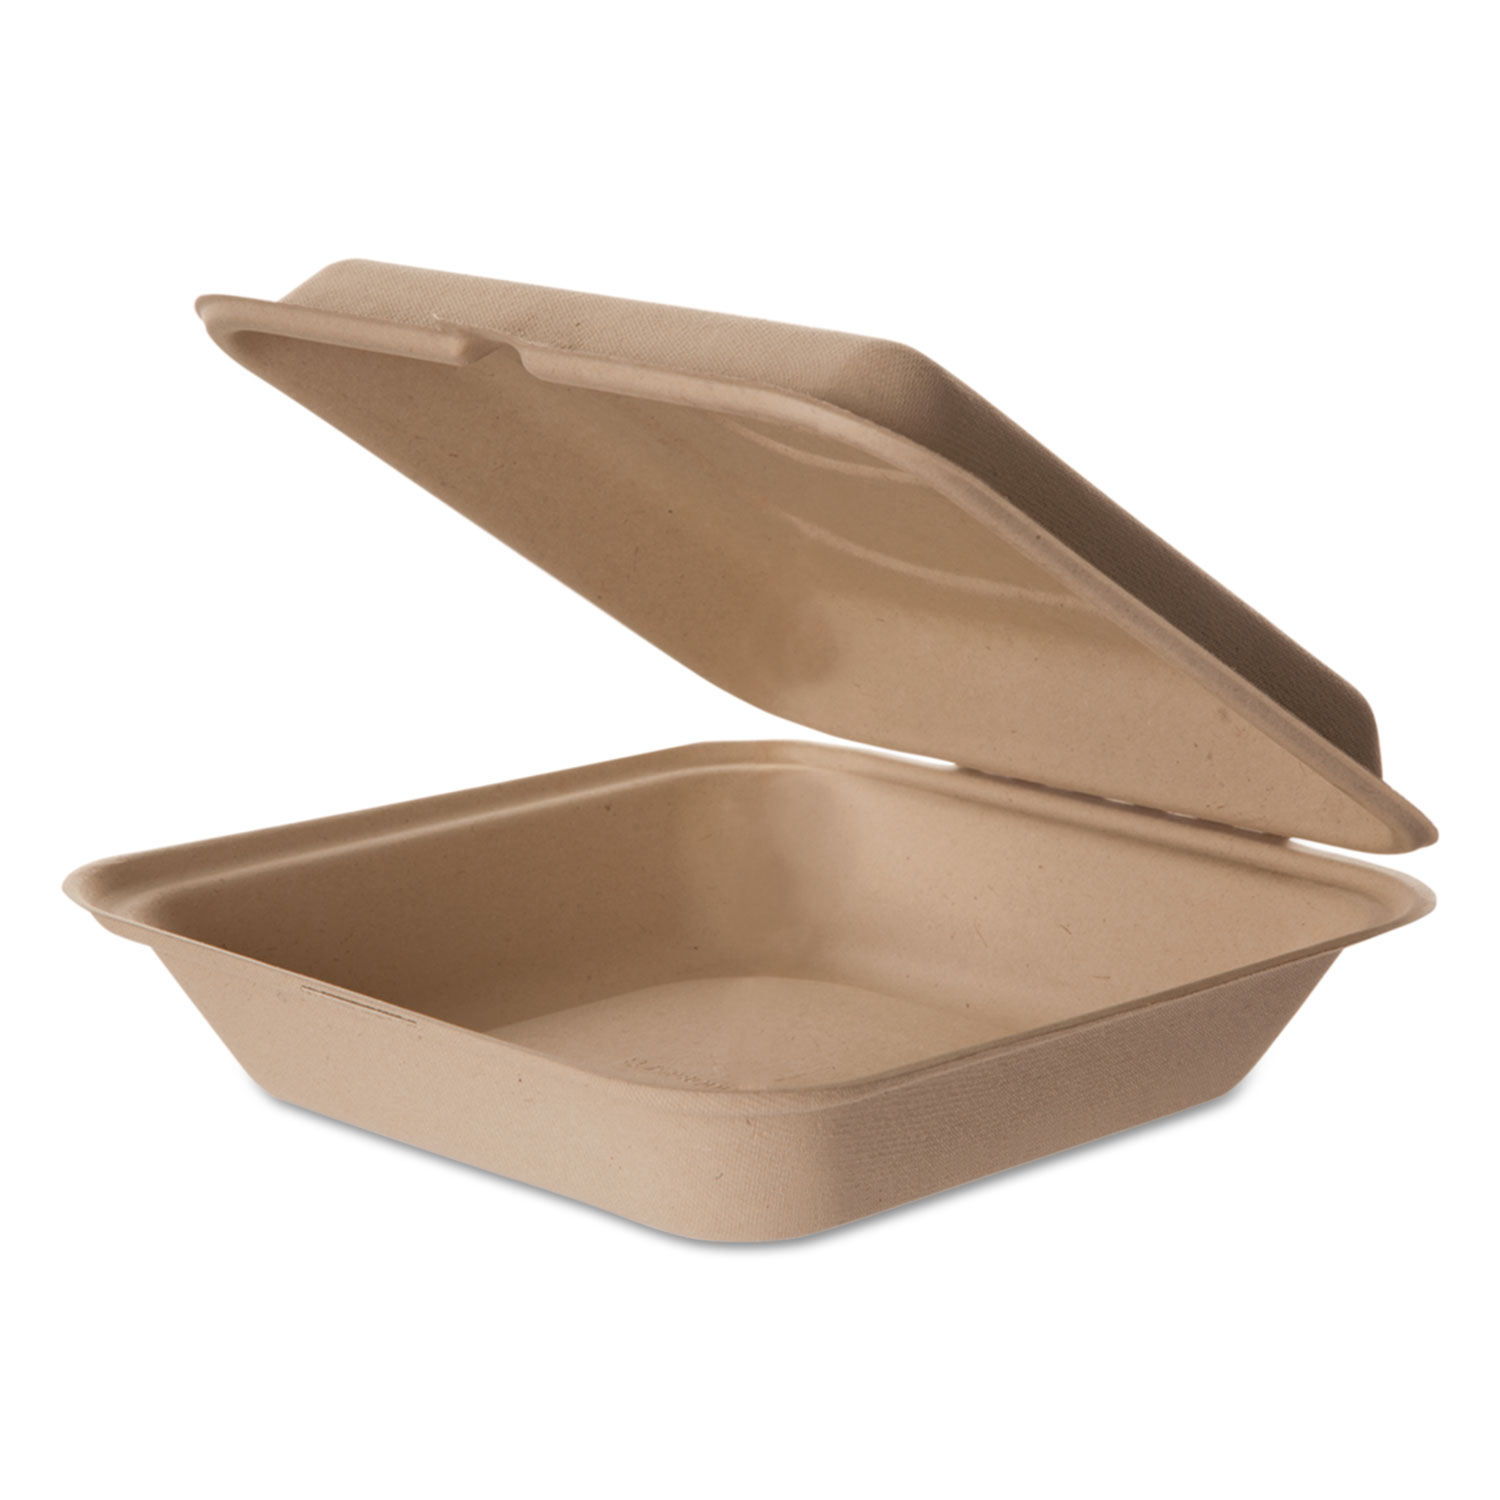  Eco-Products EP-HCW91 Wheat Straw Hinged Clamshell Containers, 9 x 9 x 3, 200/Carton (ECOEPHCW9) 